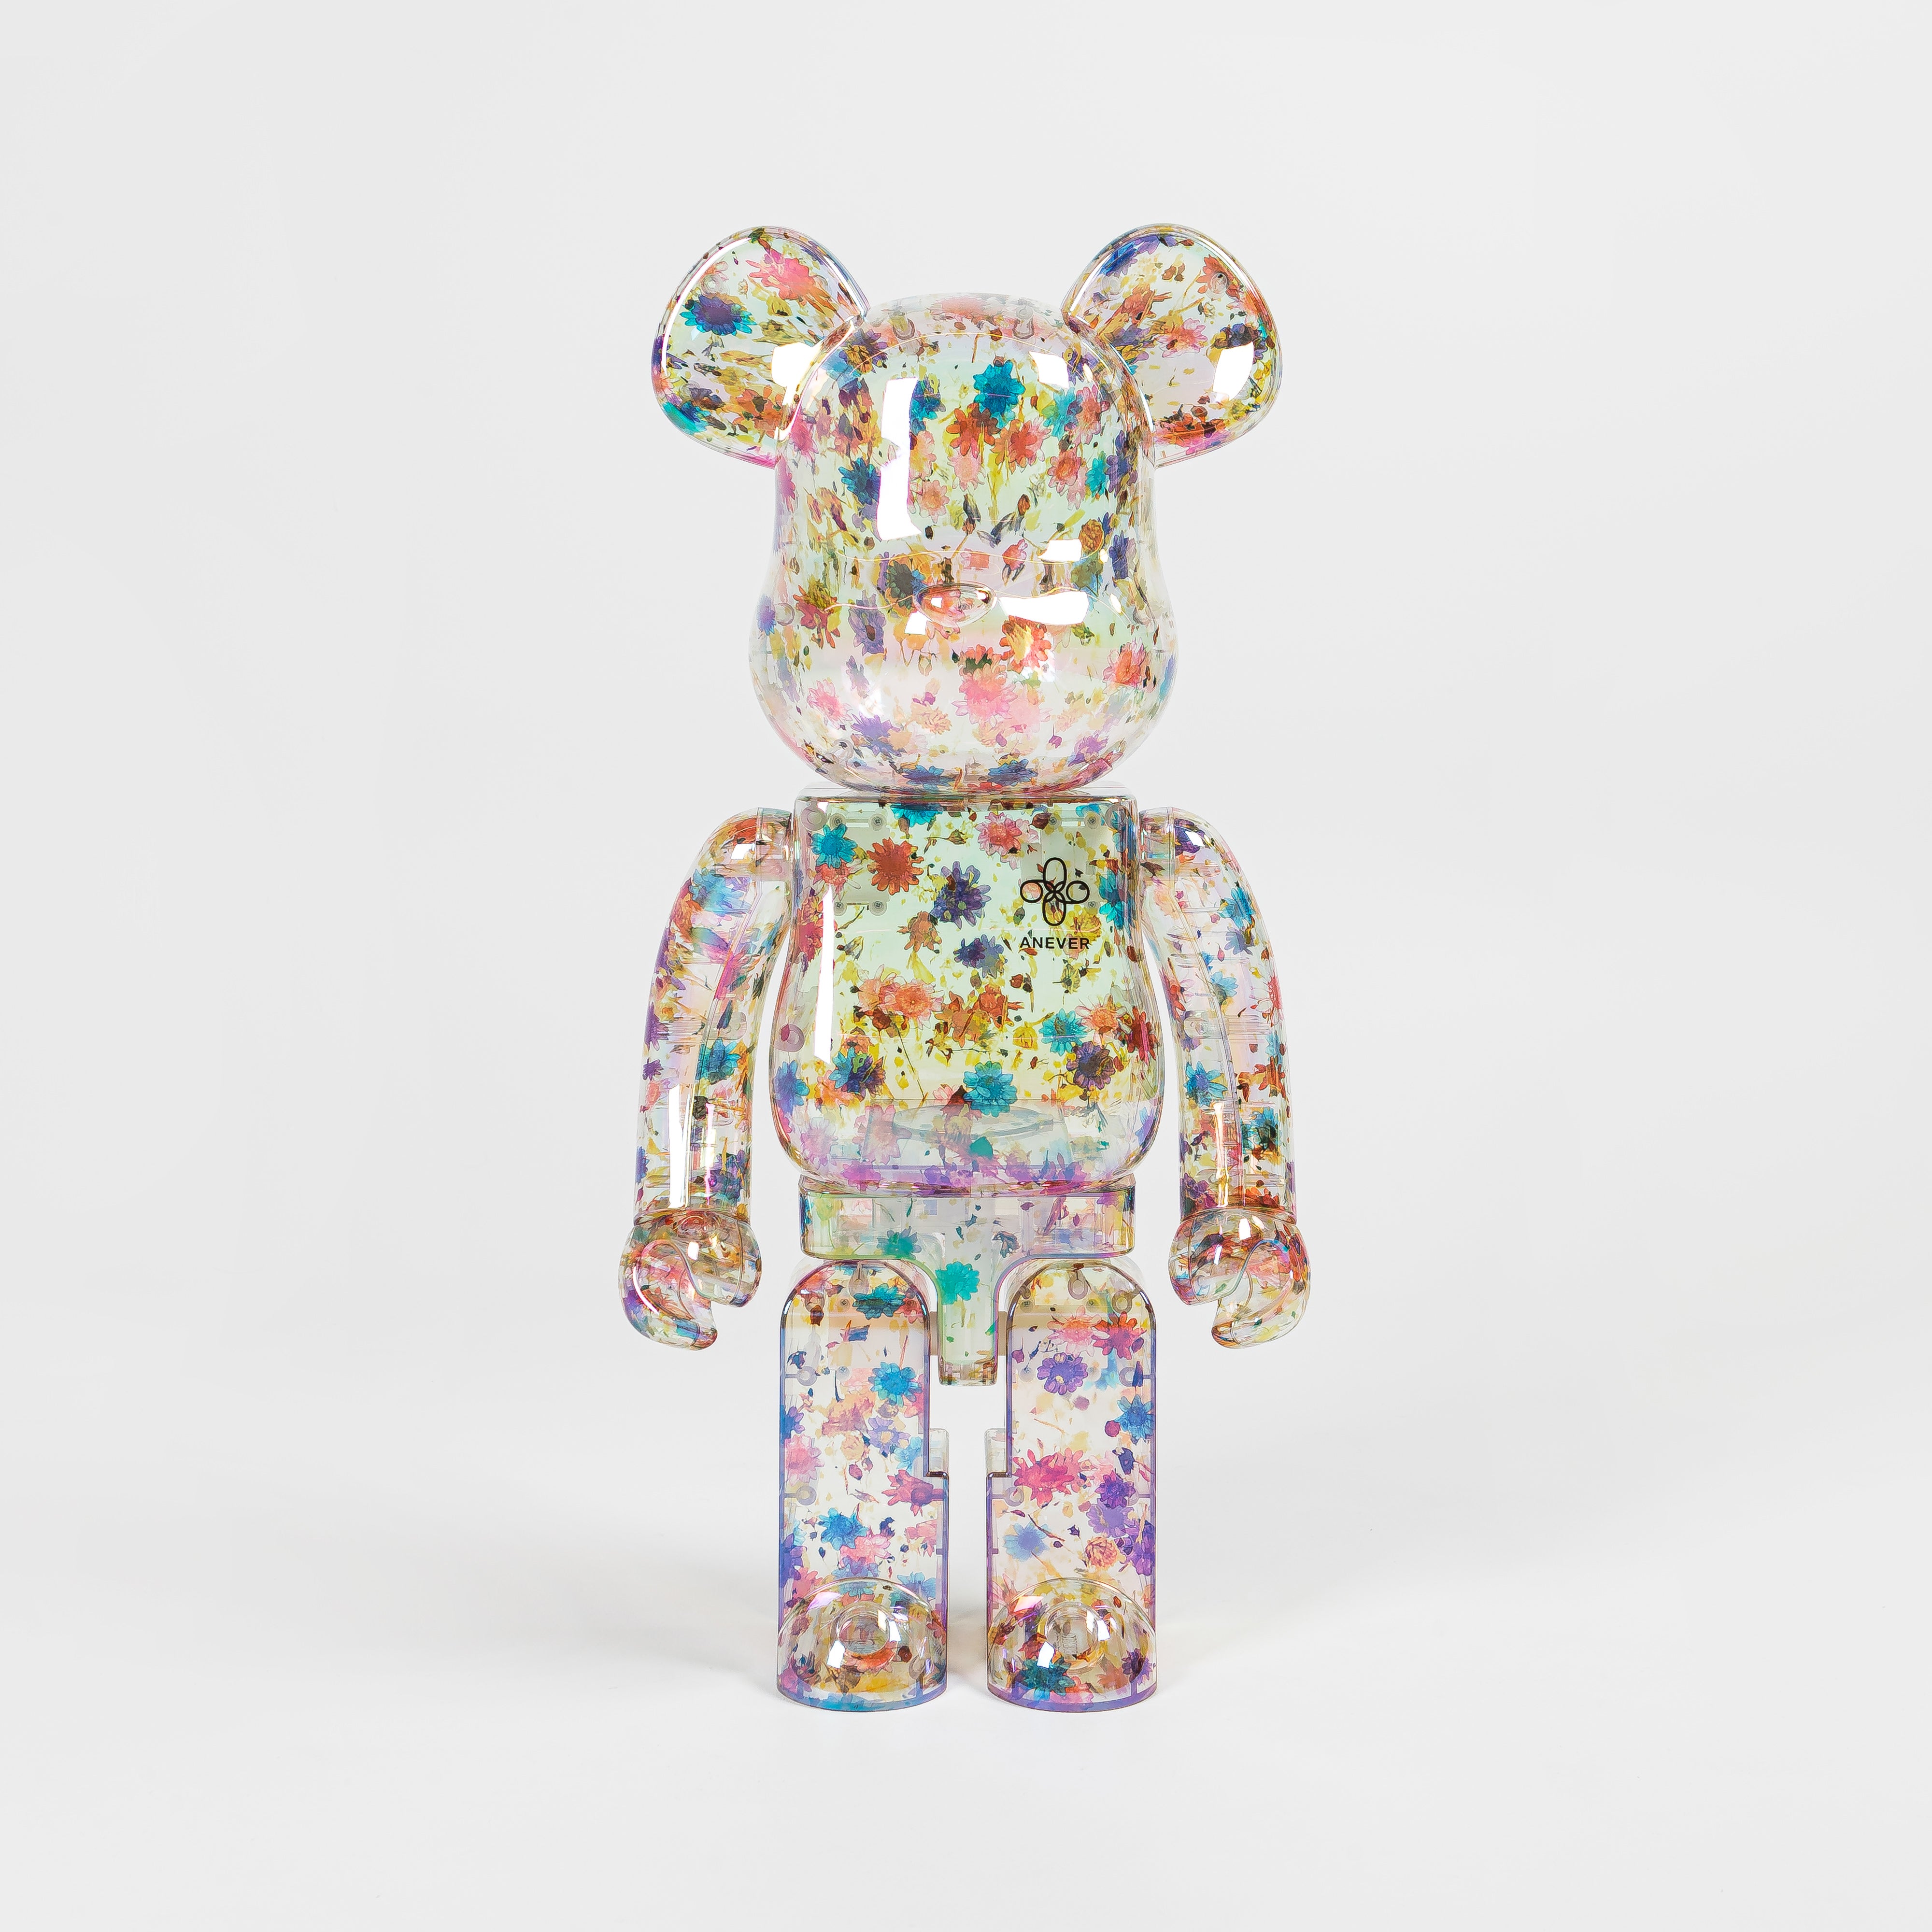 BE@RBRICK ANEVER 1000% | remark-exclusive.com